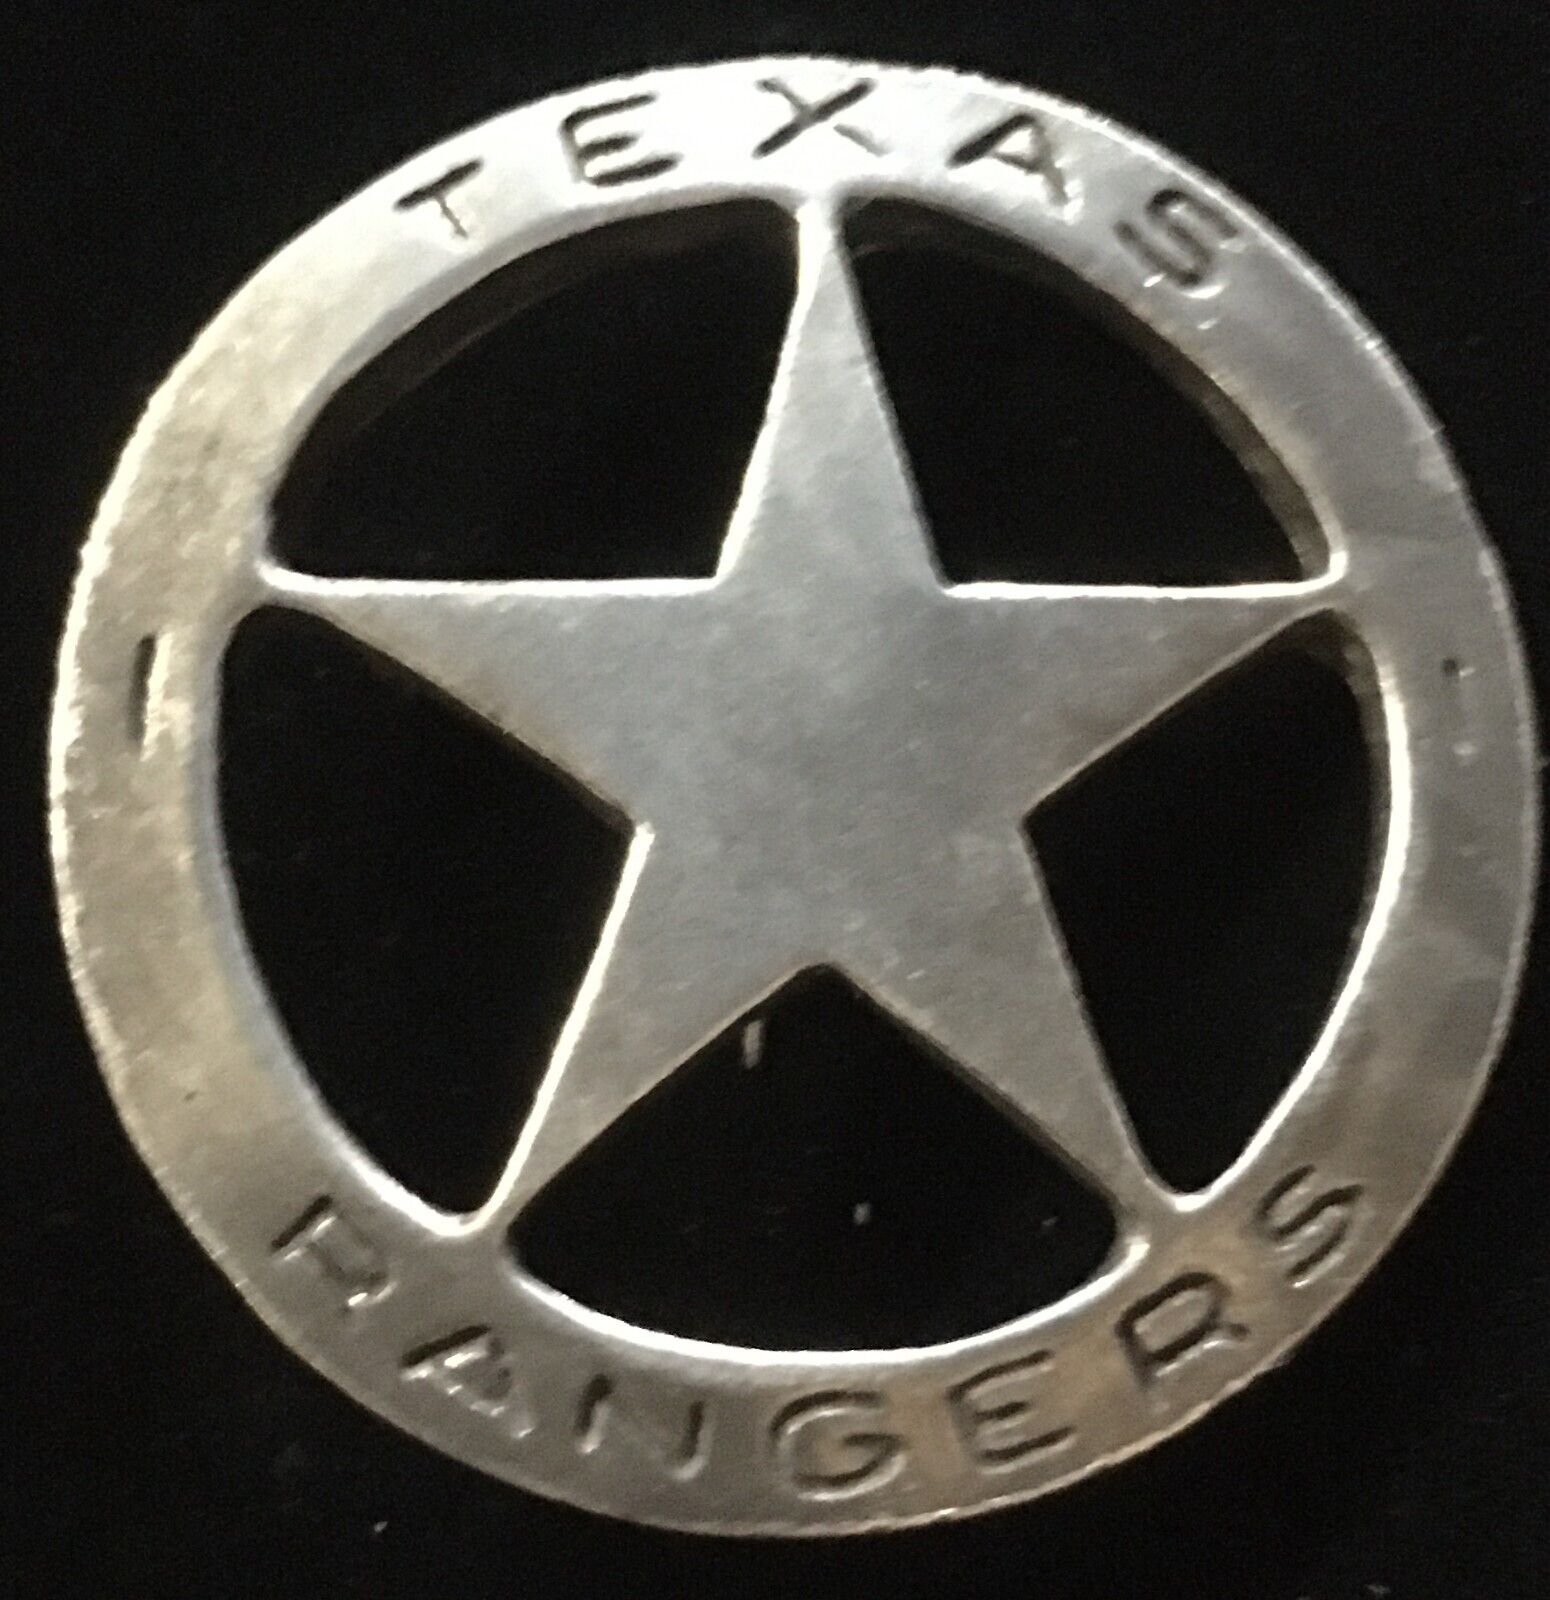 Texas Rangers Star Old West Historic Replica Badge Cast Pewter Made In The USA